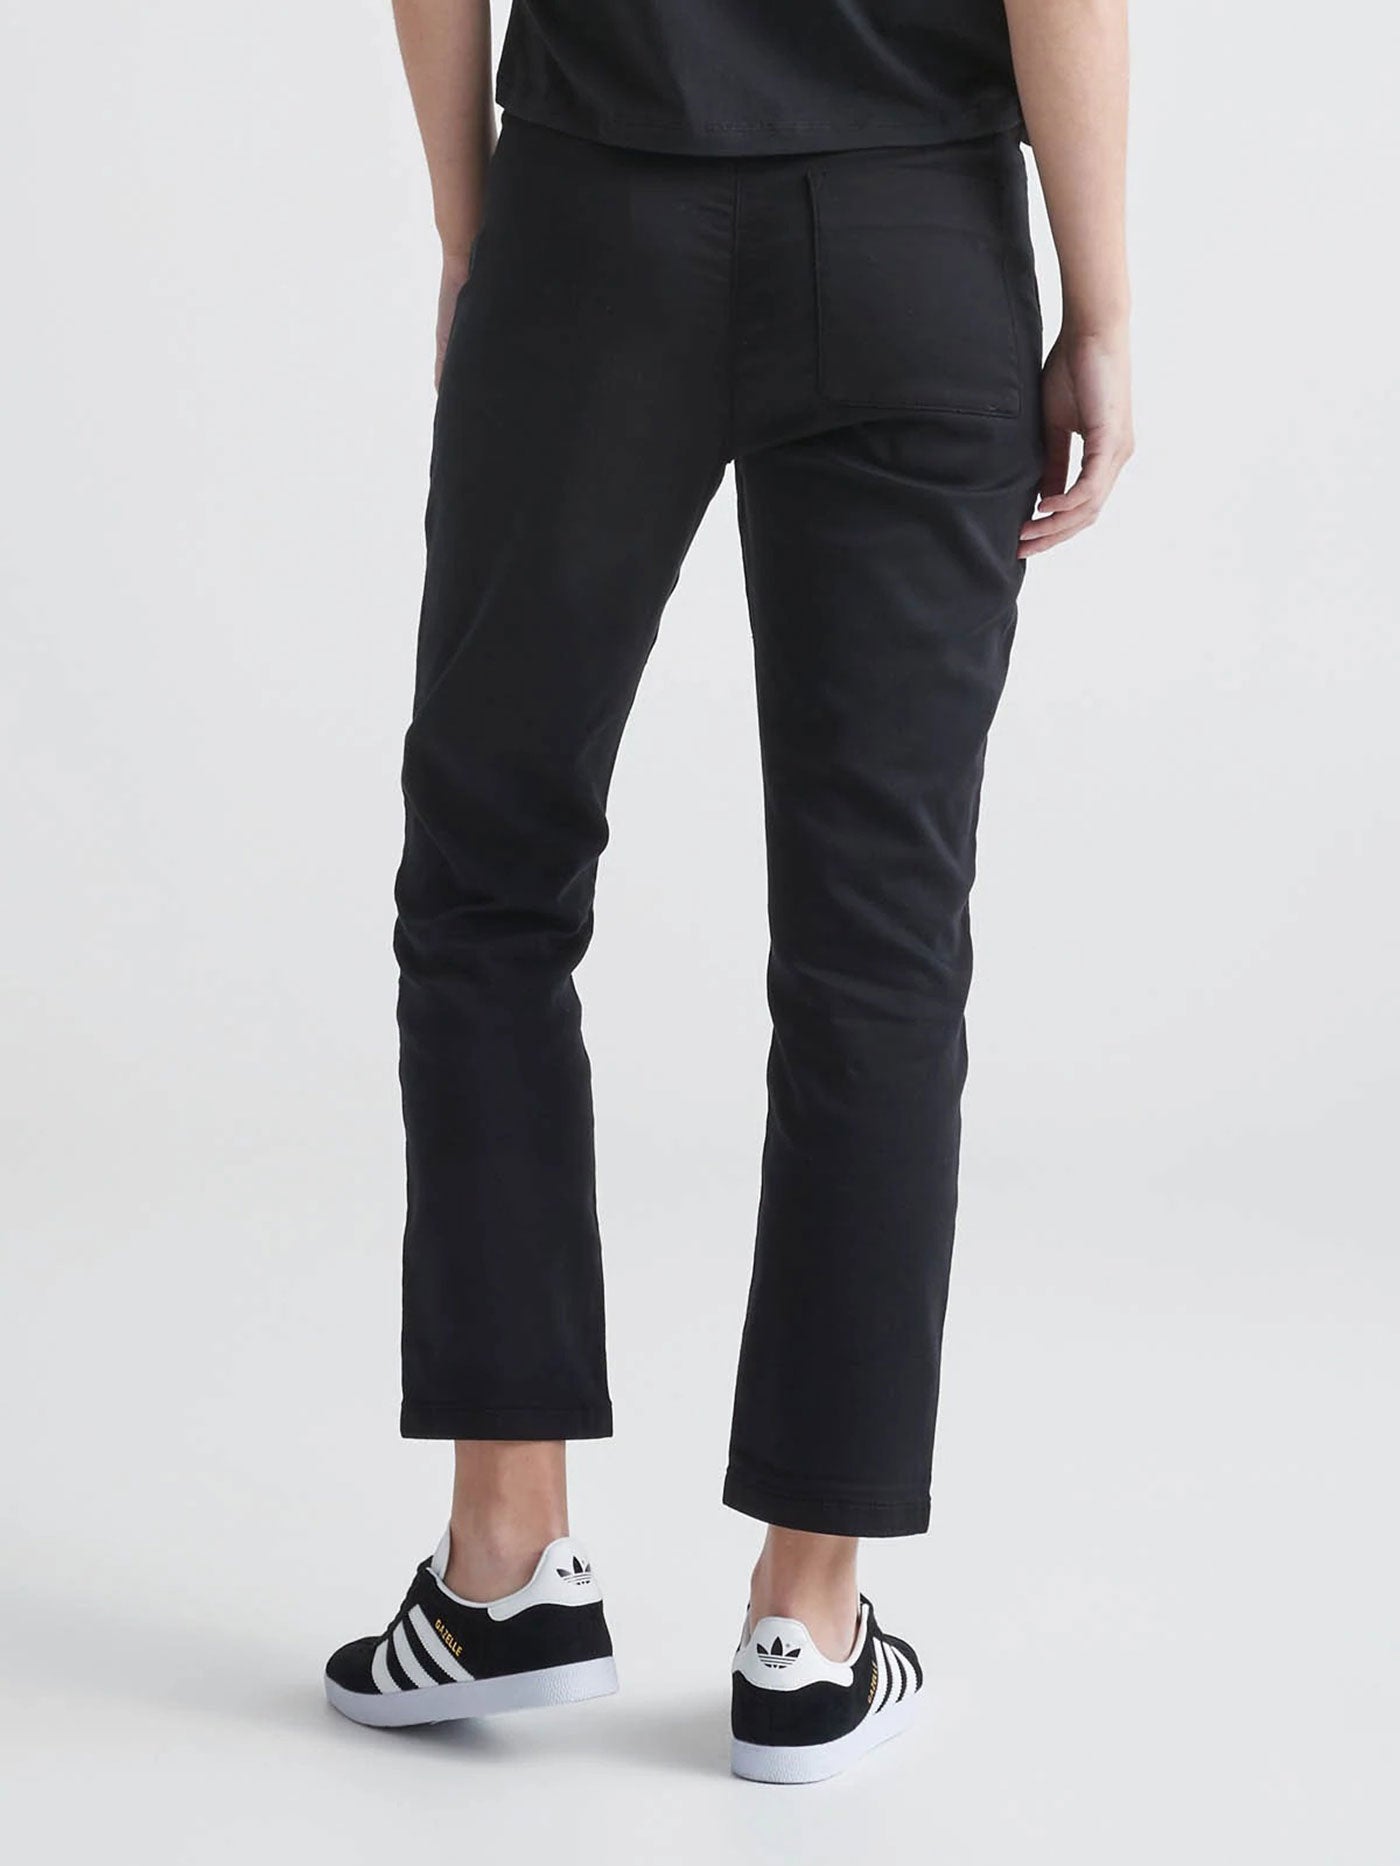 Duer No Sweat Everyday Pants